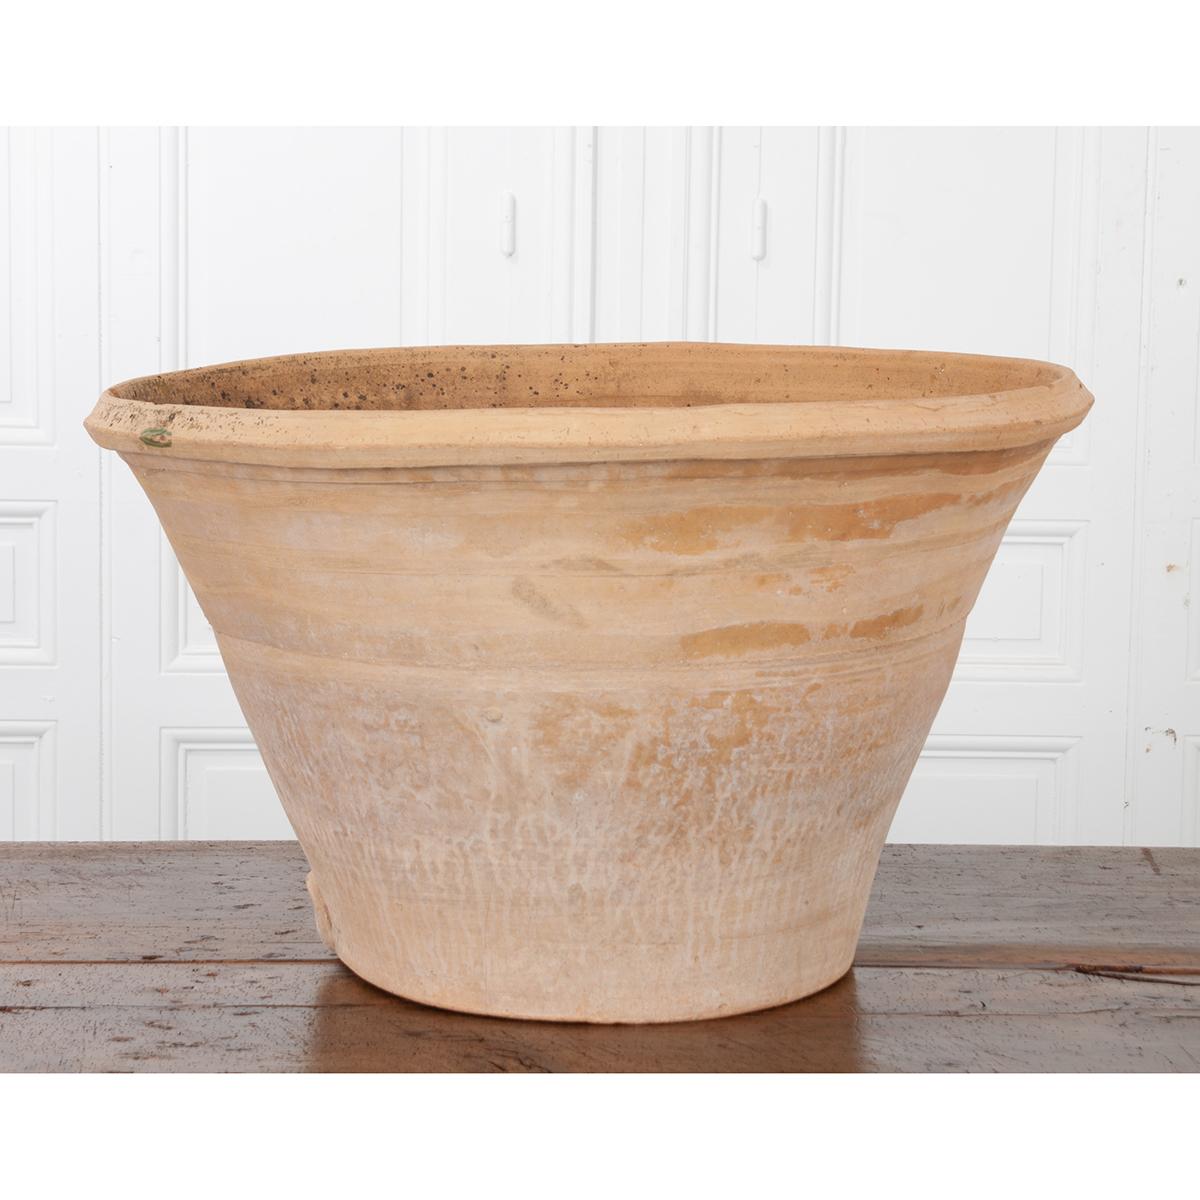 This unglazed terracotta bowl is beautifully primitive and massive. The natural color of the terracotta is still bright, despite the years of use it’s endured. Please view the detailed images to see more.
   